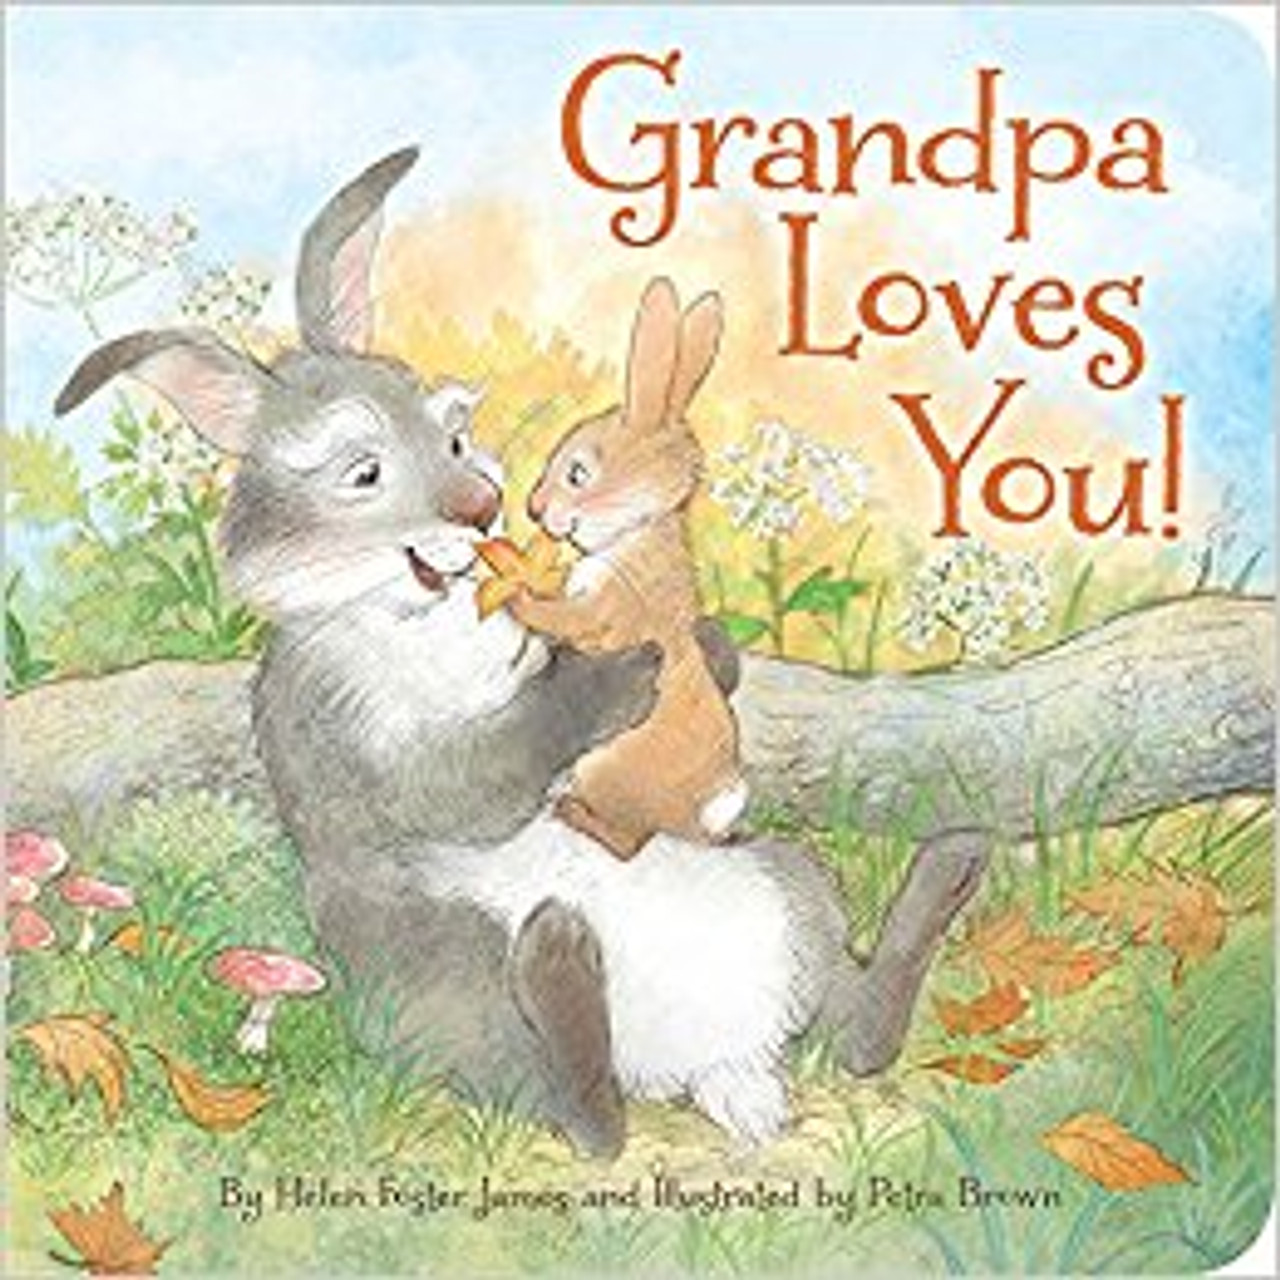 Grandpa Loves You! by Helen Foster James